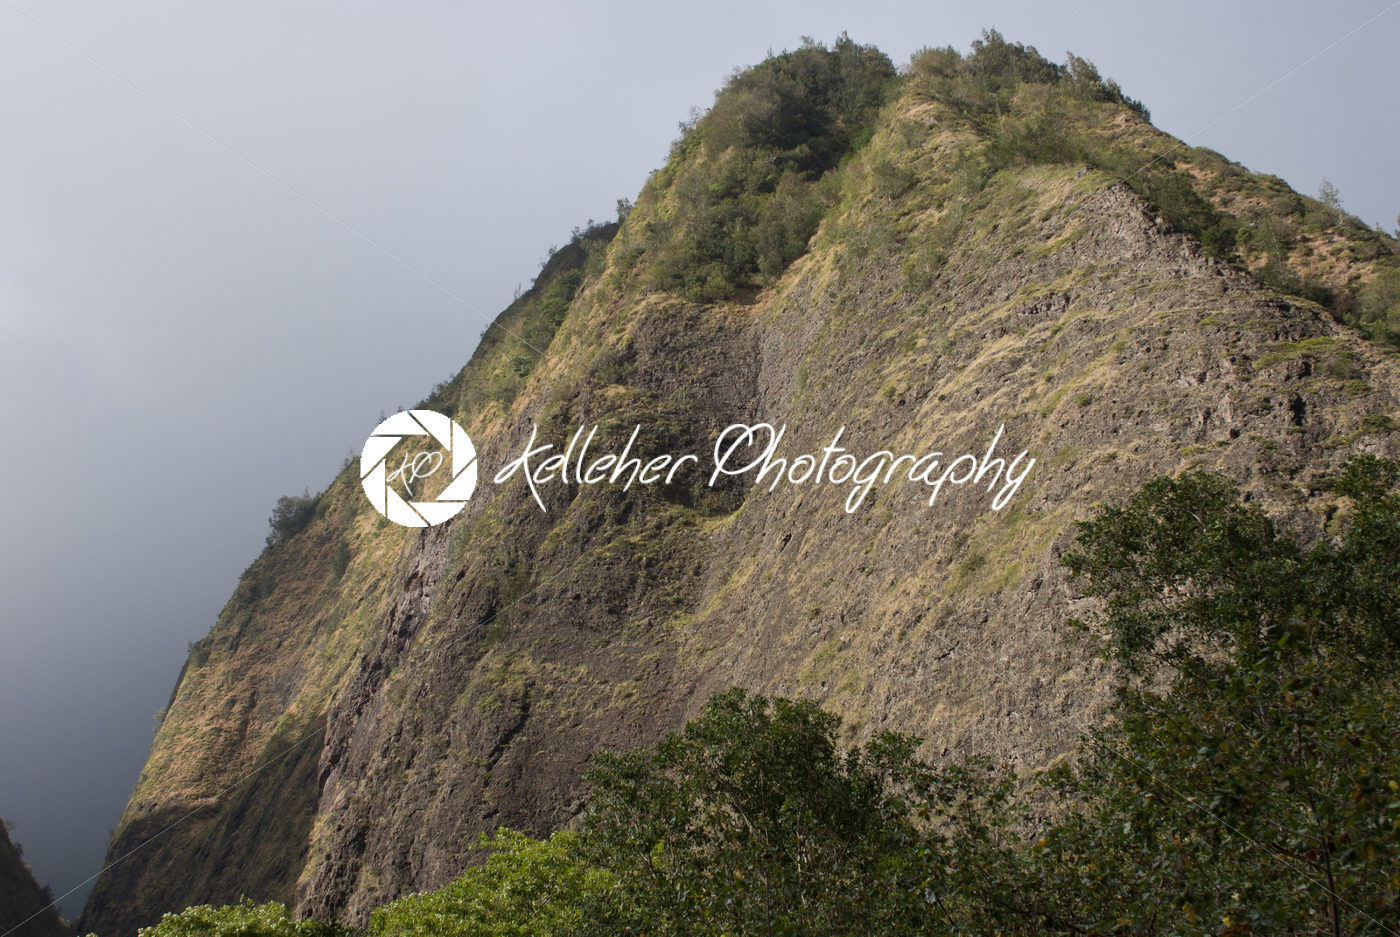 West Maui Mountains in the Ioa Valley reach into the clouds. Maui is one of many popular Hawaiian tourist destinations. - Kelleher Photography Store